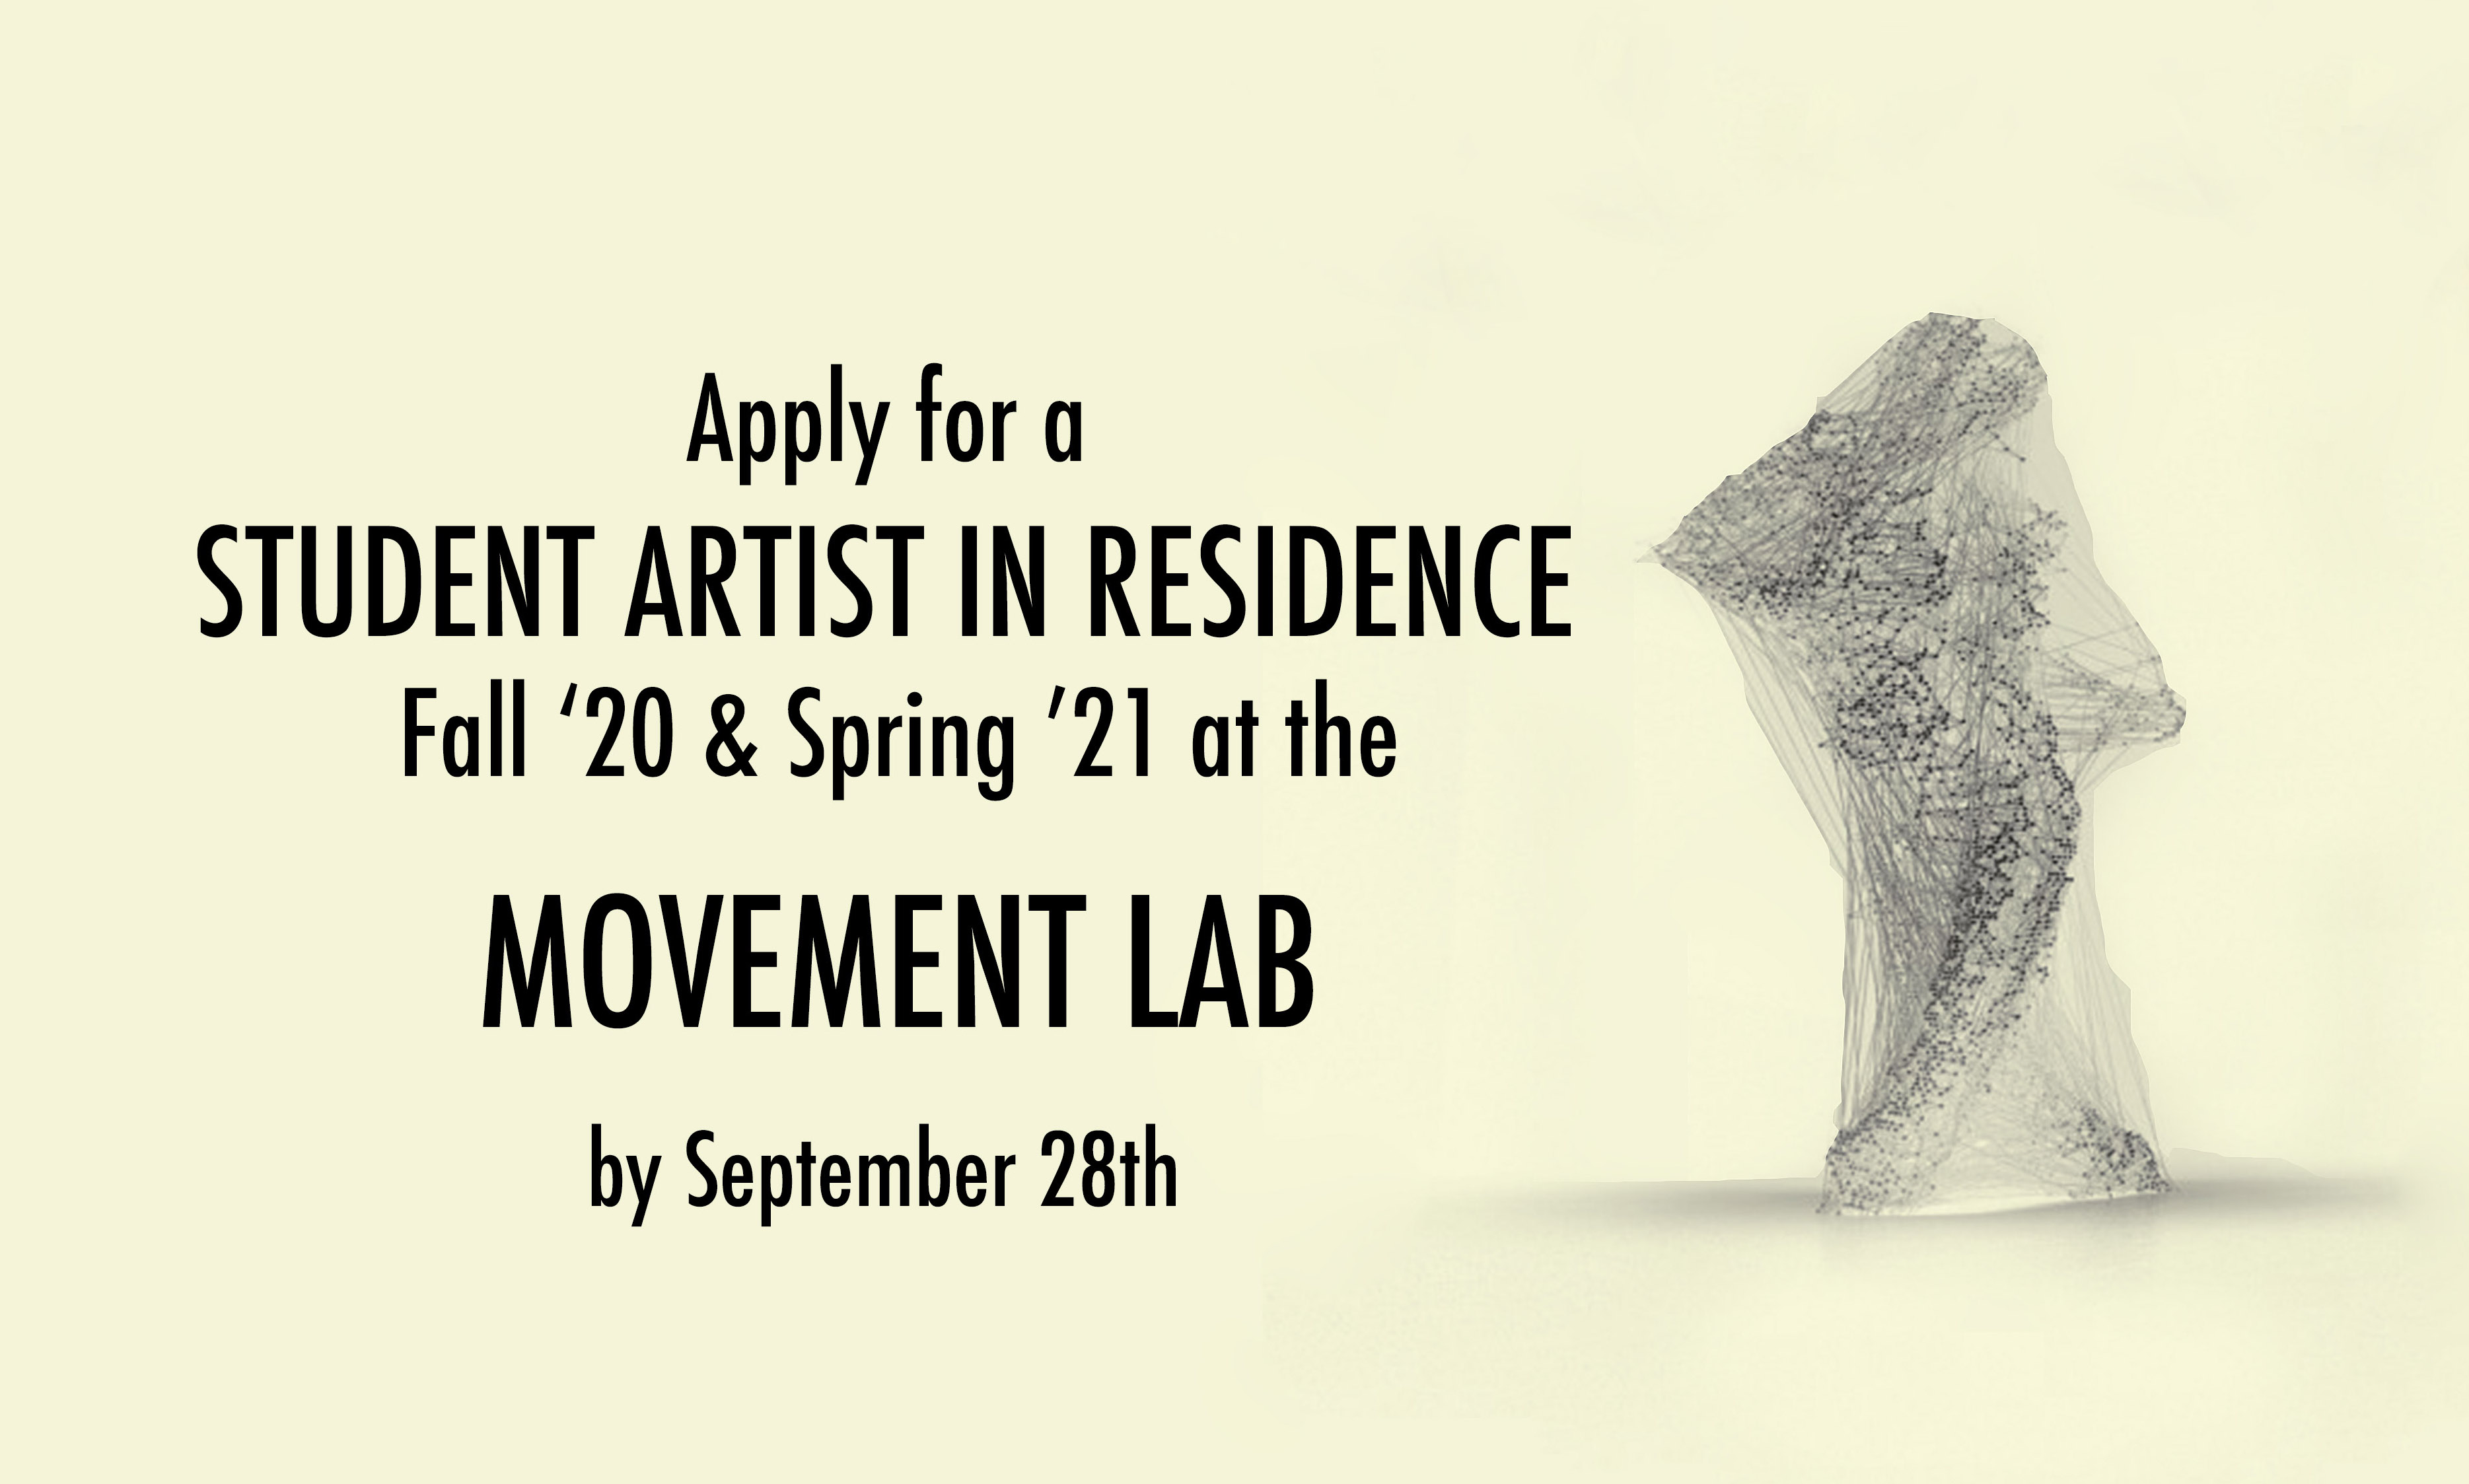 Apply for a Student Artist in Residence Fall '20 and Spring '21 at the Movement Lab by September 28th